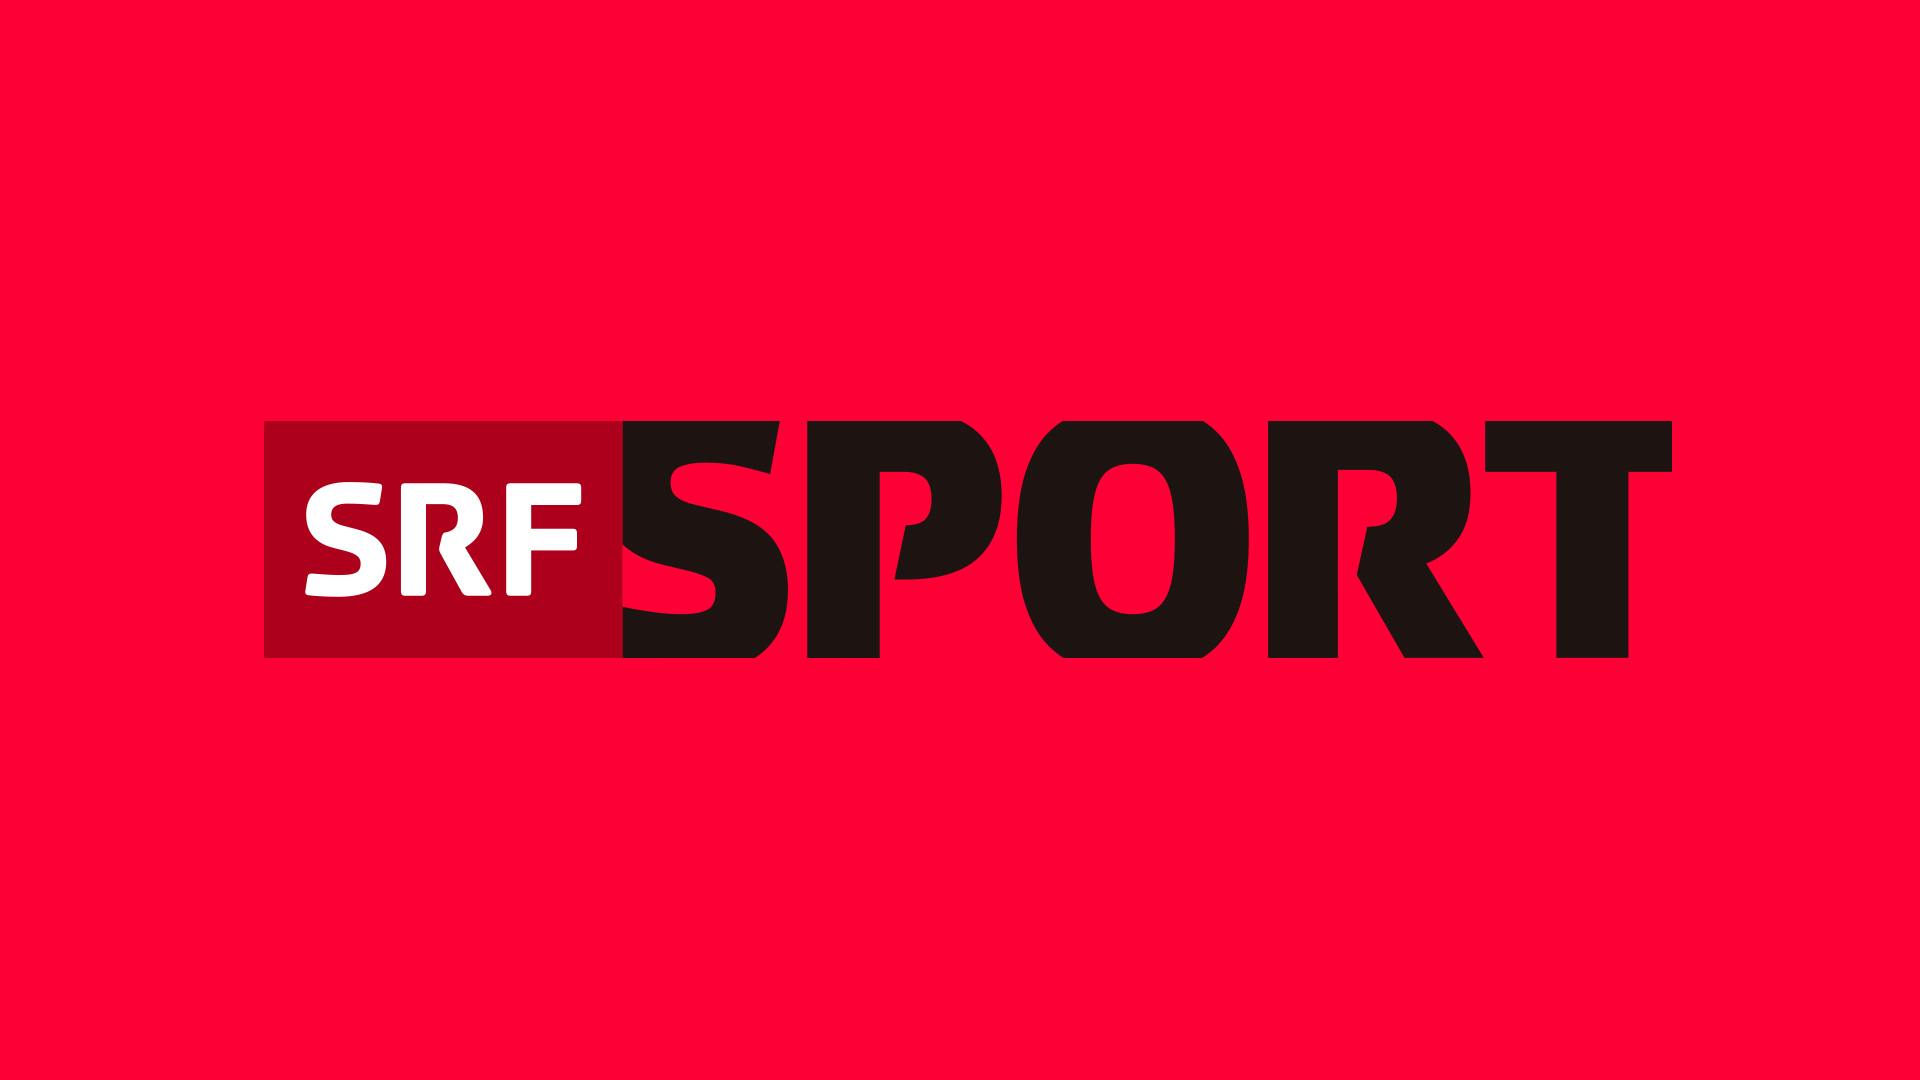 An action-packed new visual identity for SRF Sport